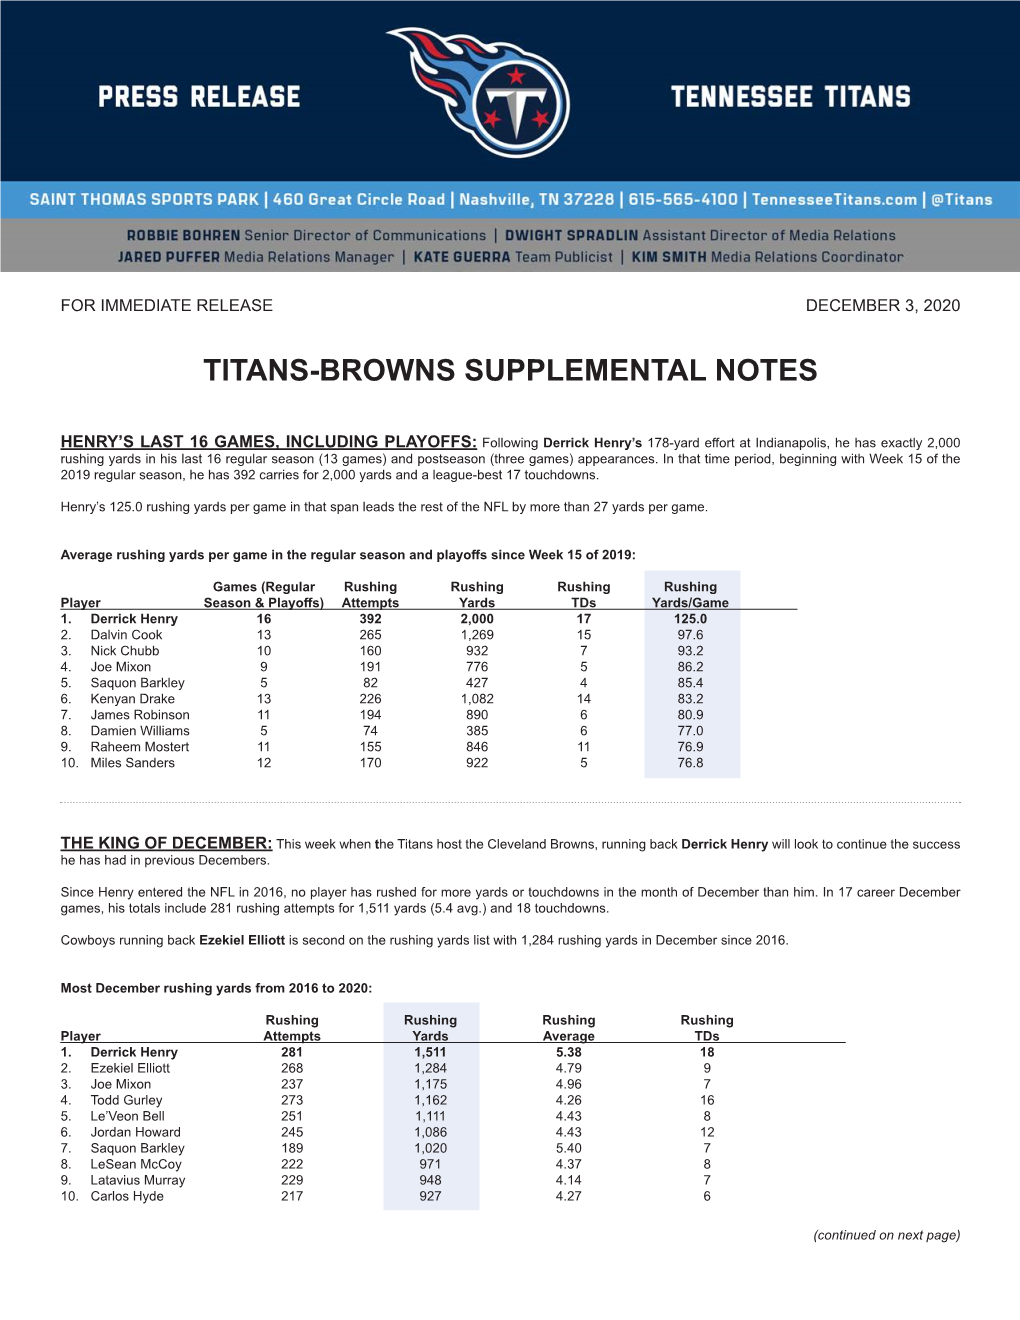 Titans-Browns Supplemental Notes